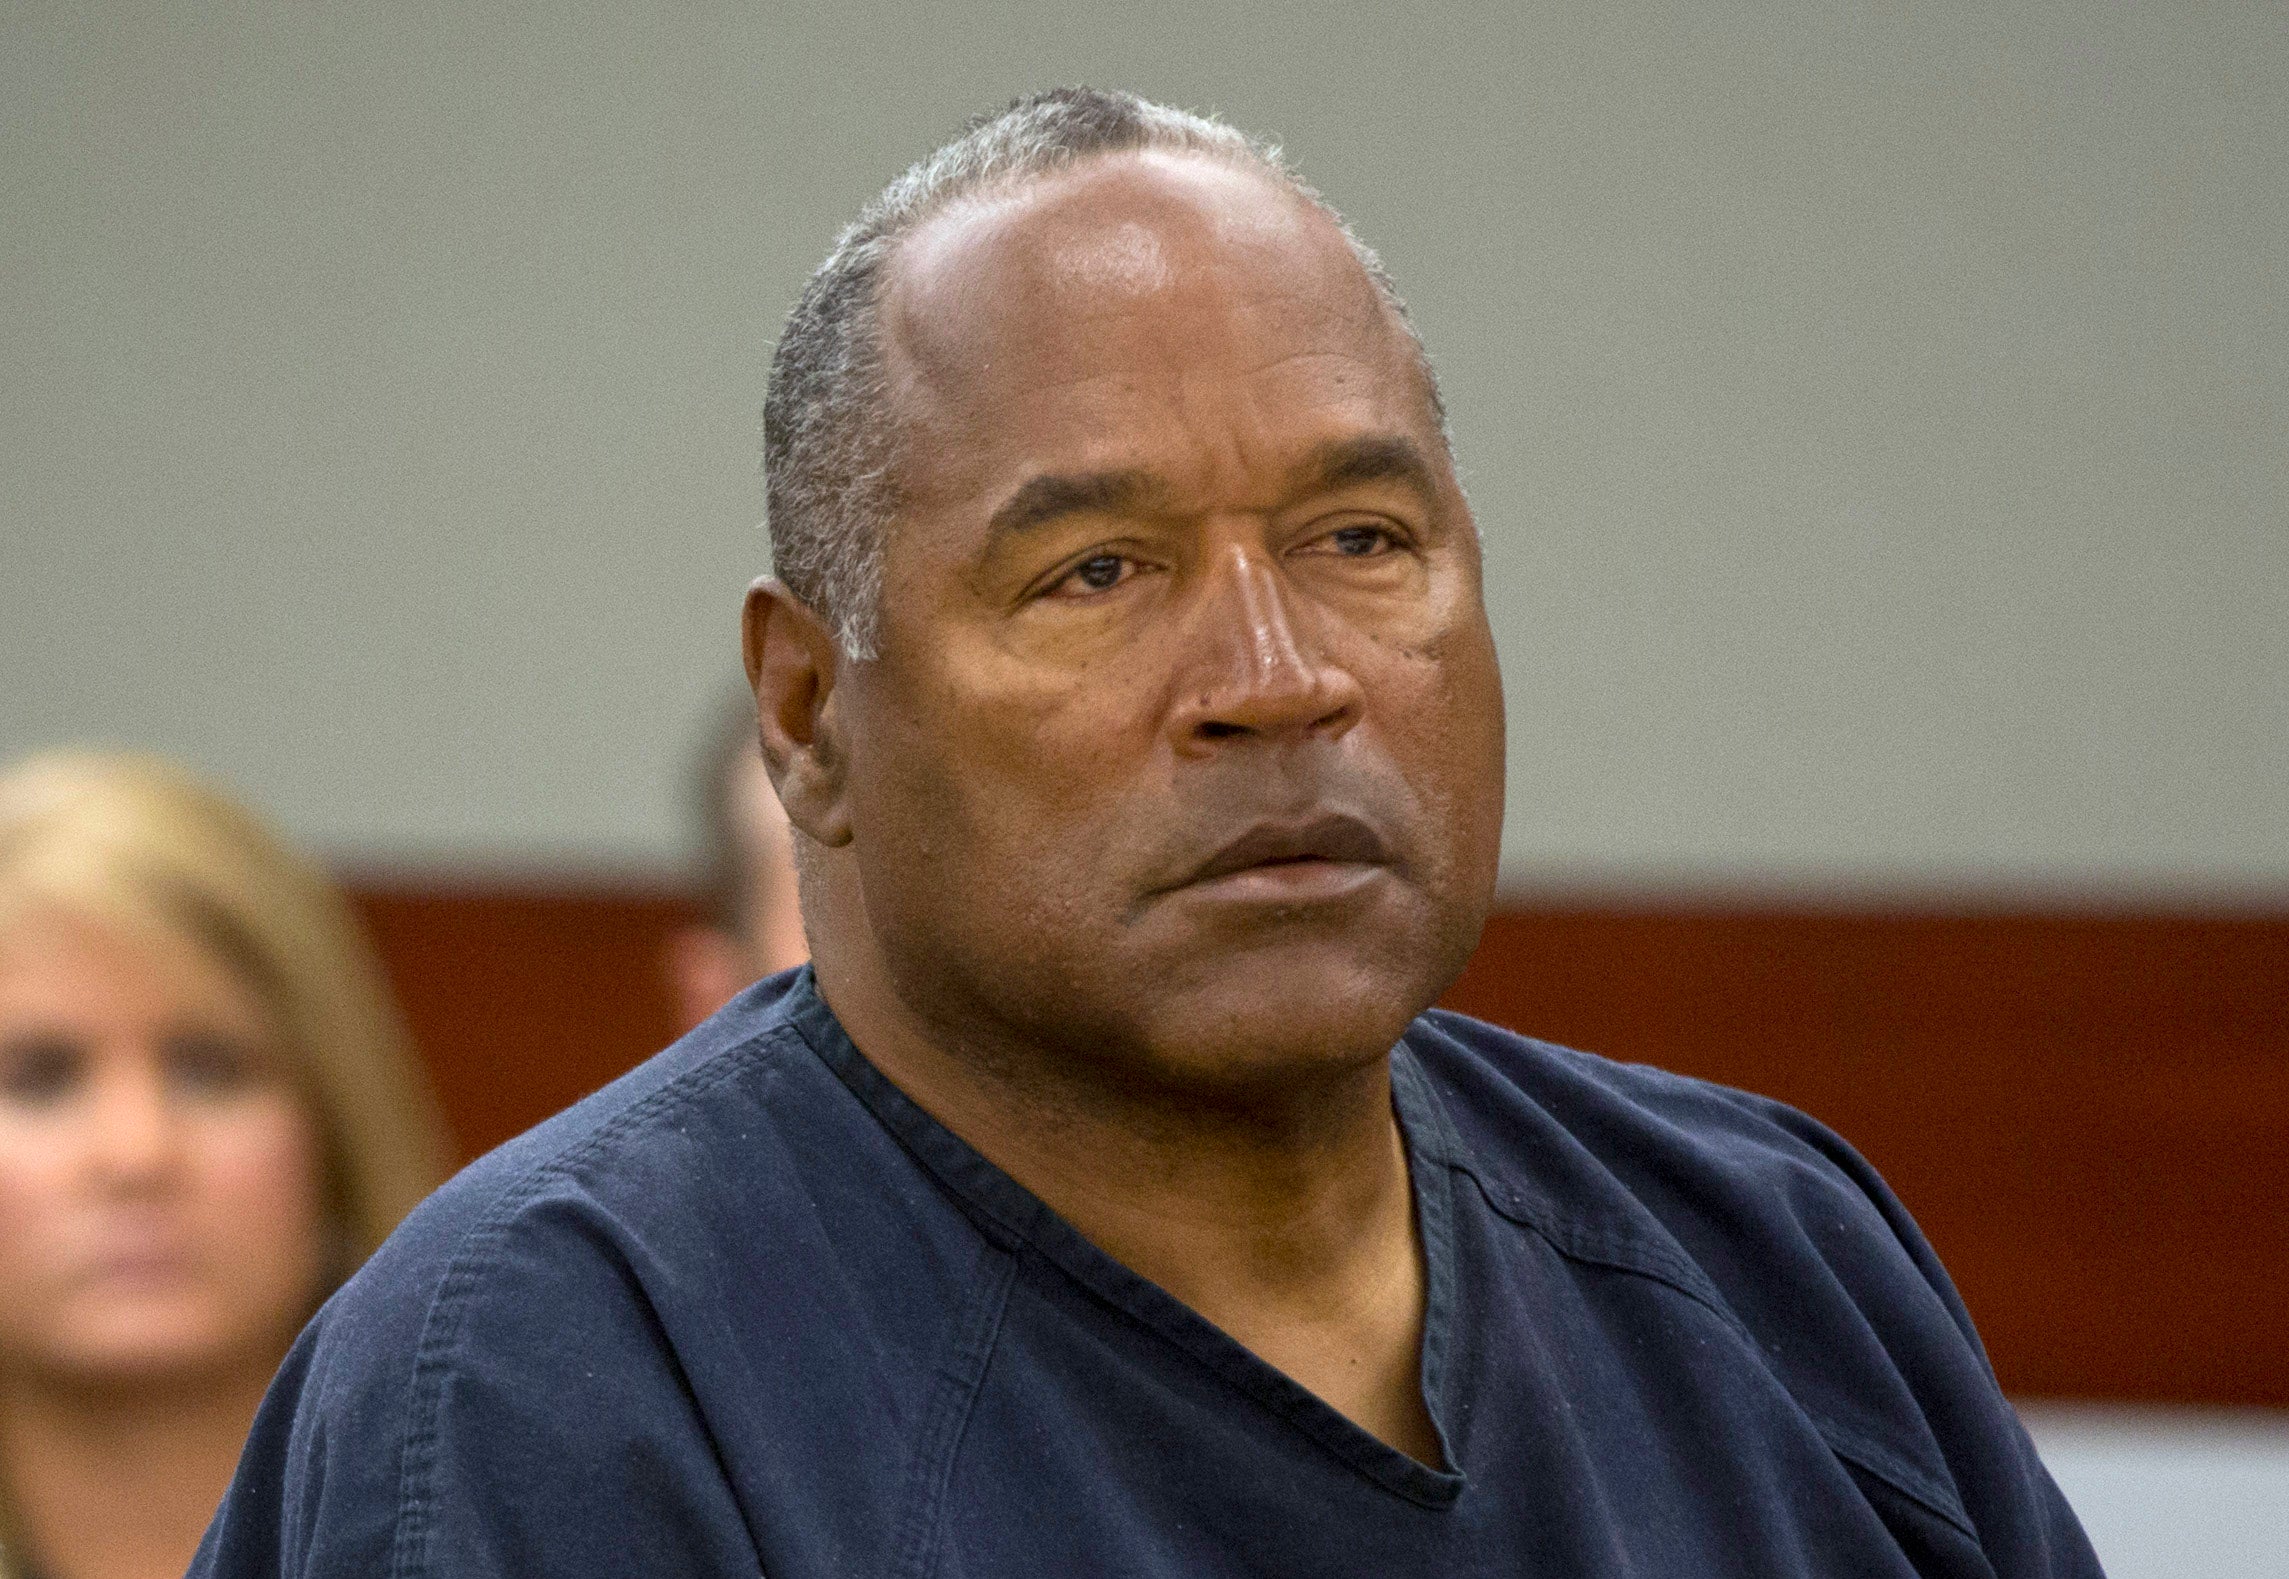 O.J. Simpson listens to audio recording played during an evidentiary hearing for O.J. Simpson in Clark County District Court in Clark County District Court May 16, 2013